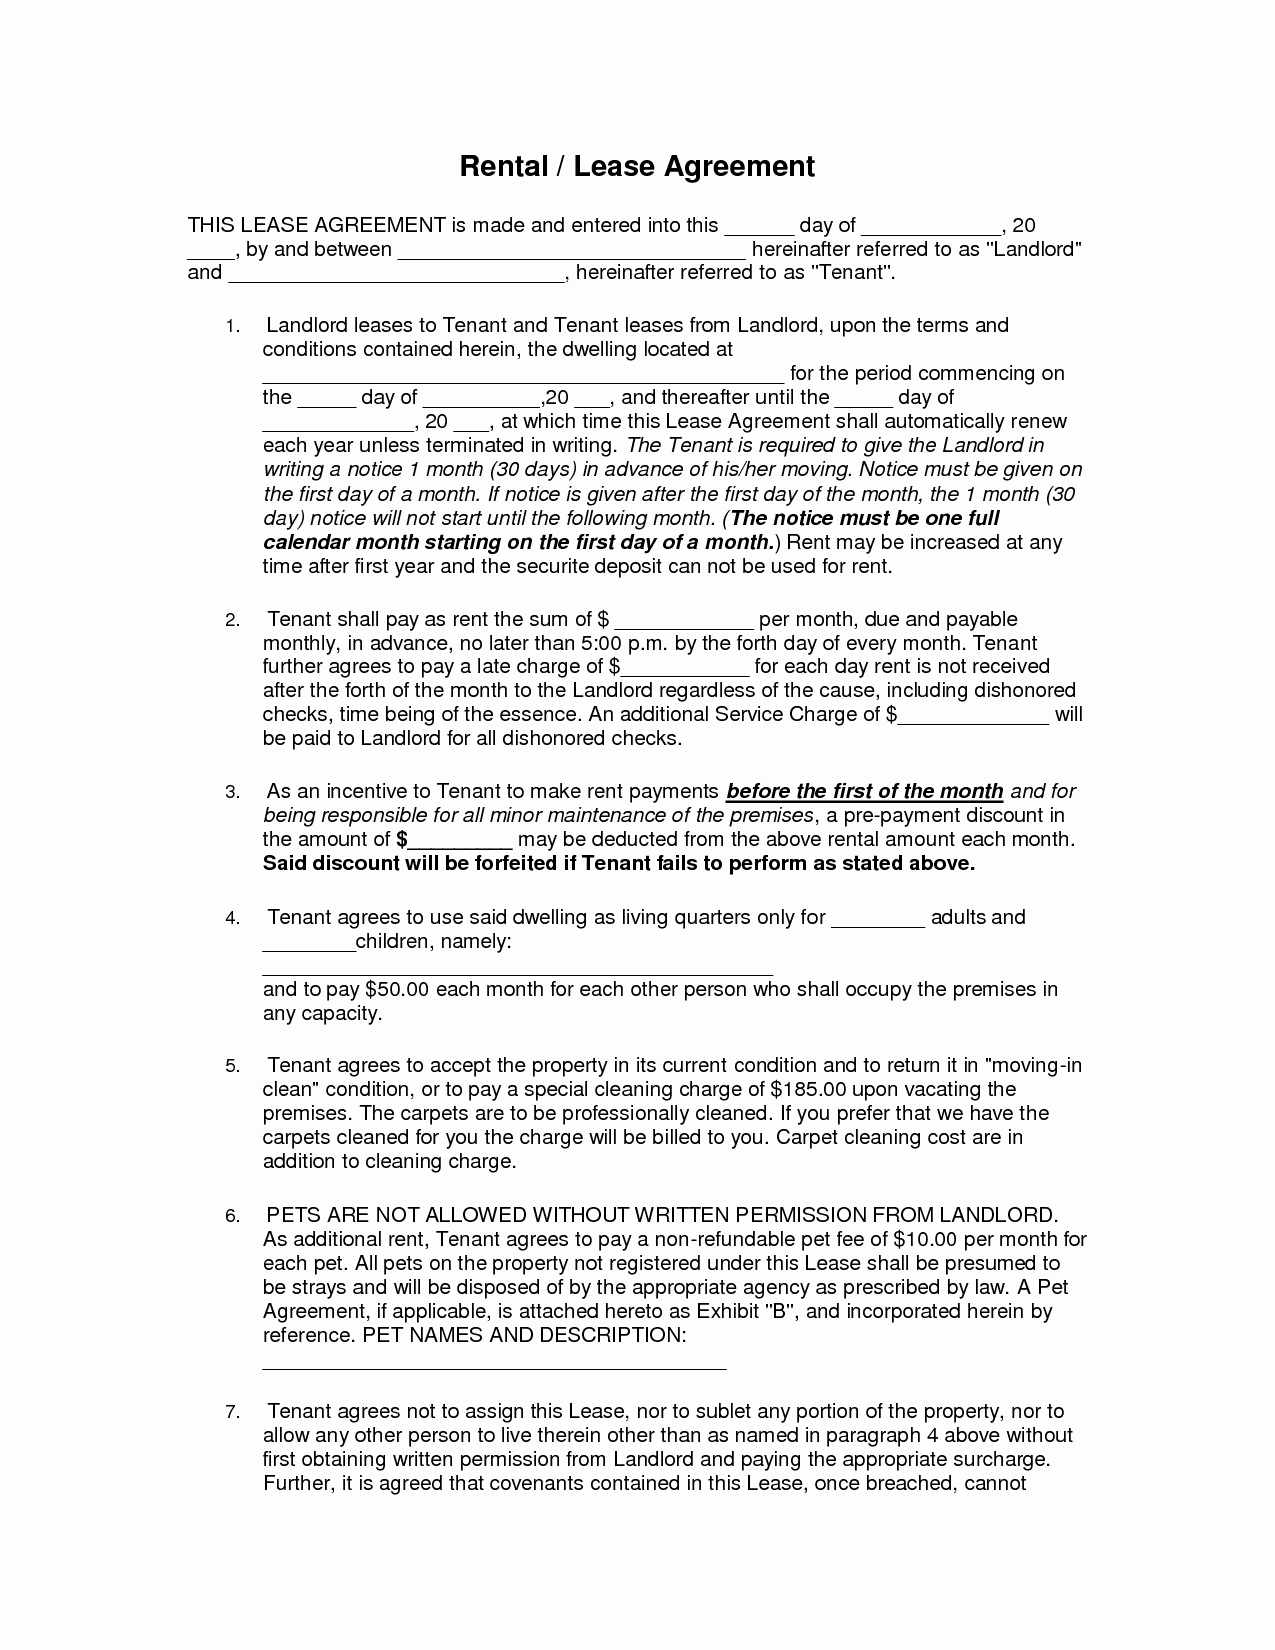 Free Printable Commercial Lease Agreement New Free Copy Rental Lease Agreement 1275px